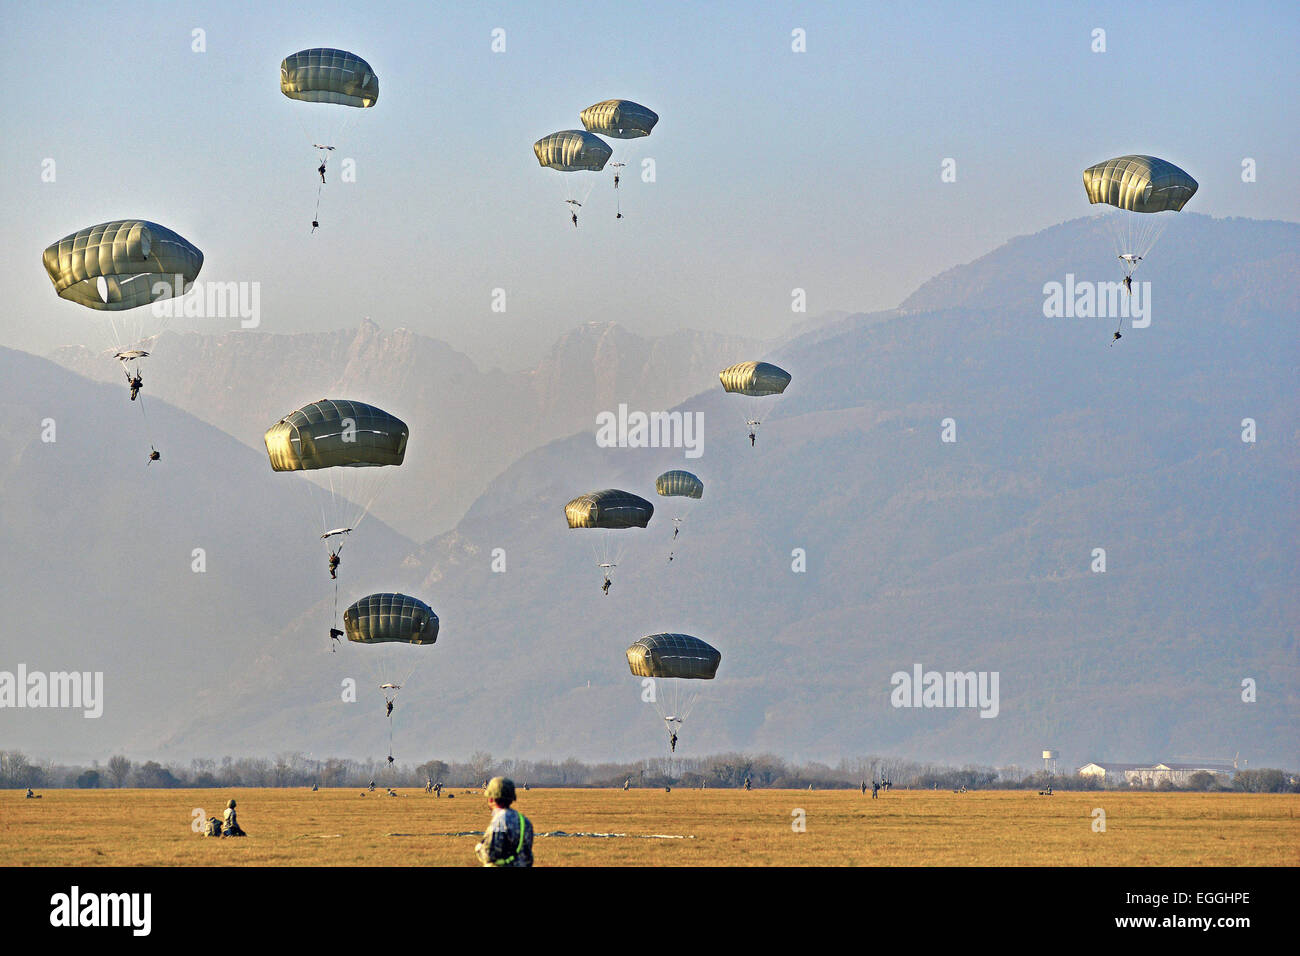 US Army paratroopers with the 173rd Airborne Brigade parachute jump during an airborne training operation February 19, 2015 in Pordenone, Italy. Stock Photo